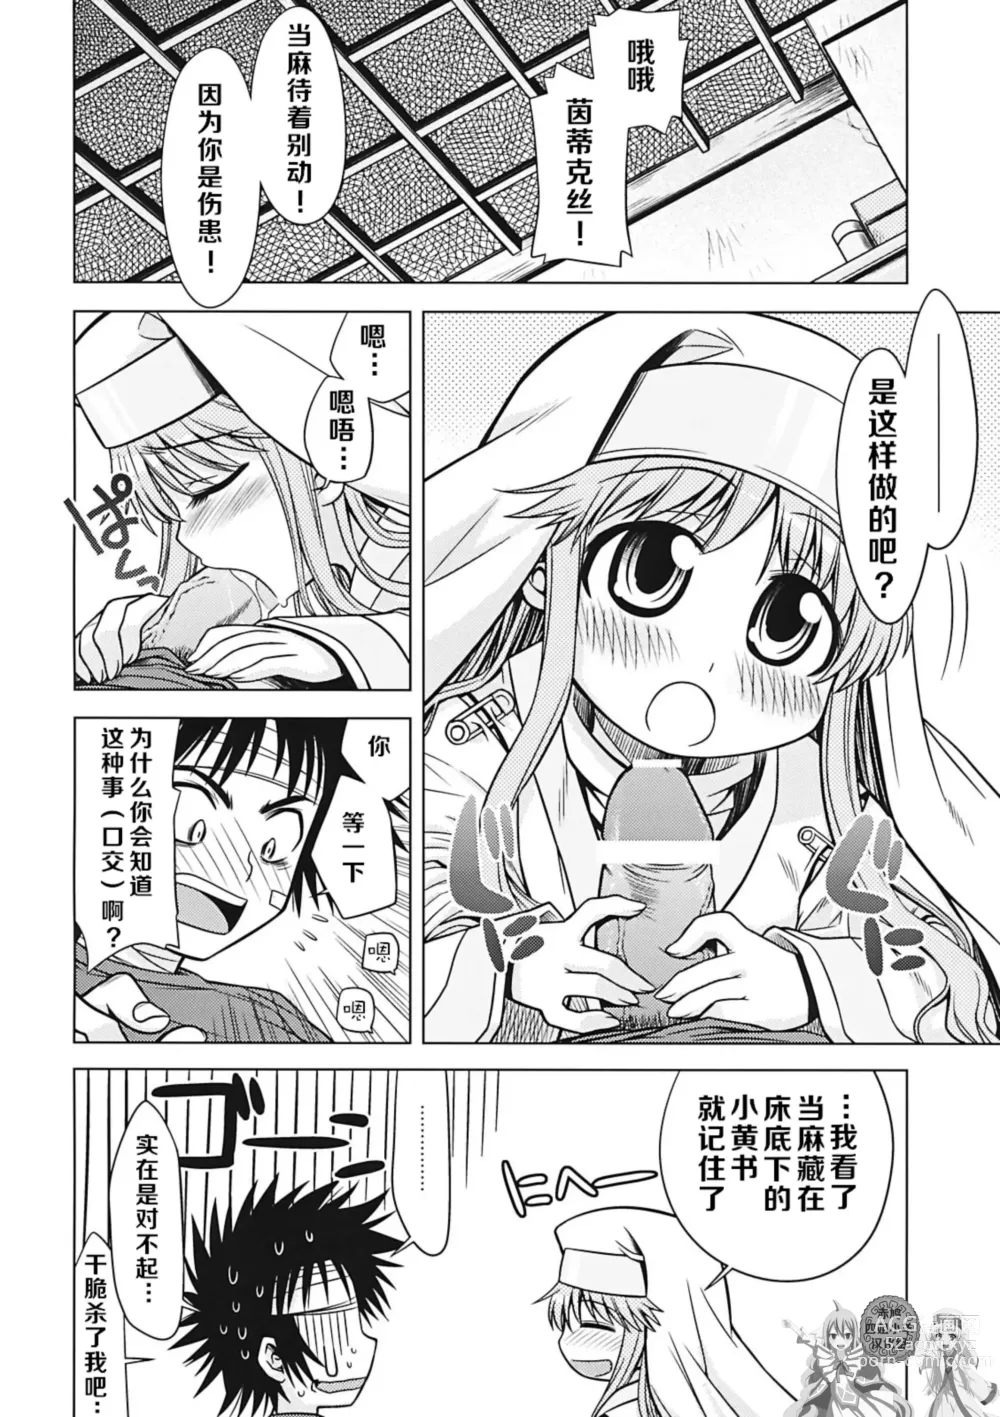 Page 6 of doujinshi 茵蒂克丝的那个哦